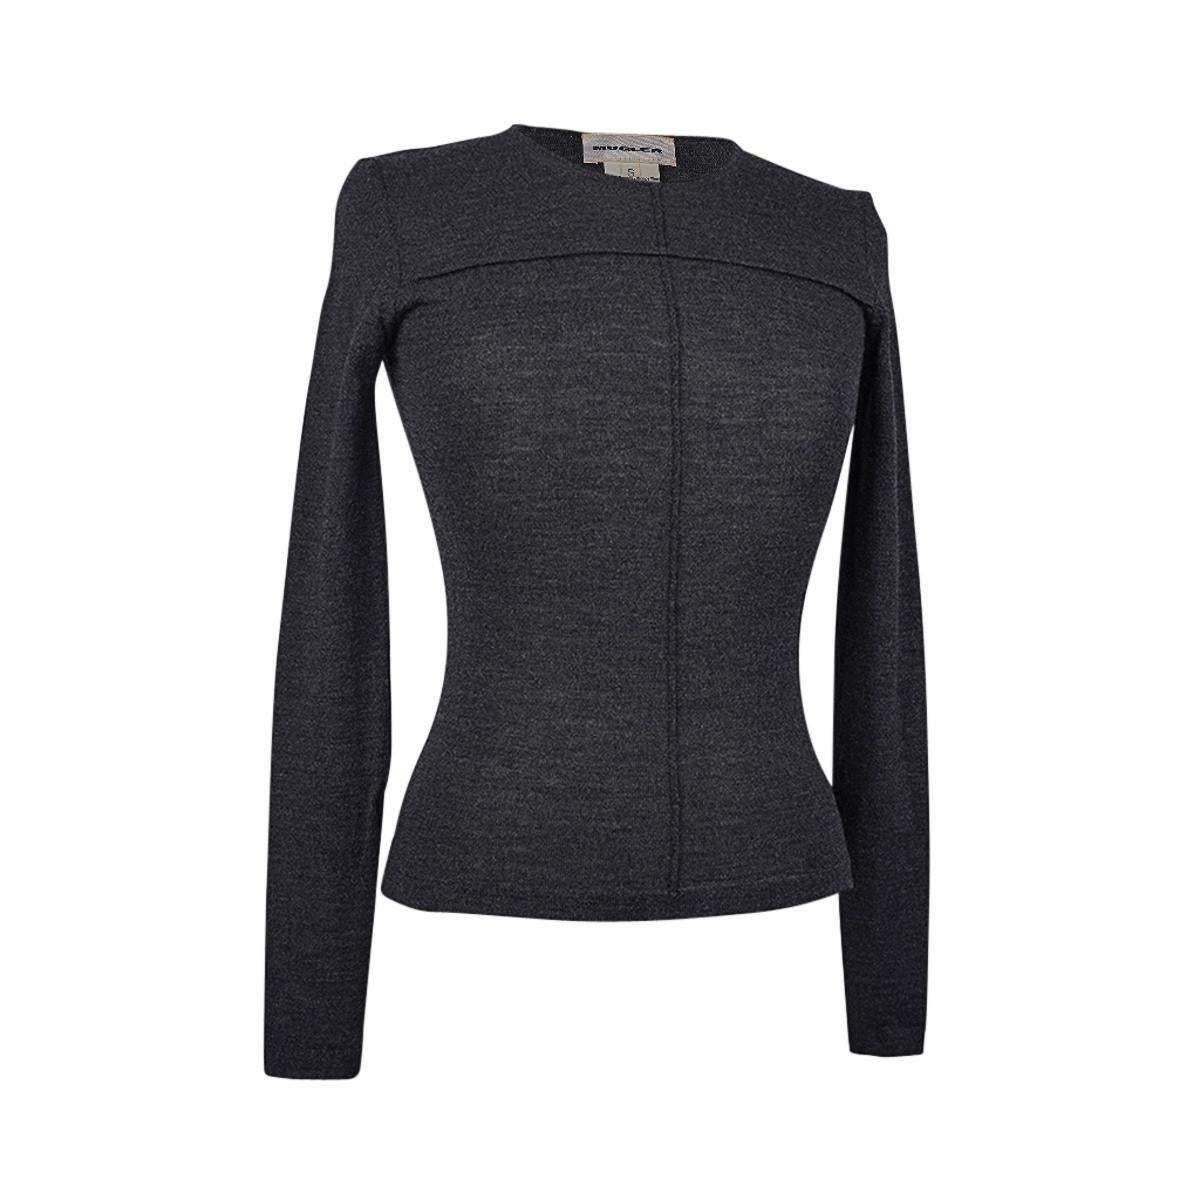 Mugler vintage top features in a rich dark gray with piping detail in the front.
Long sleeves and crew  neck.
Classic and simple this is a timeless piece.
Fabric is wool.

SIZE S

TOP MEASURES: 
LENGTH  21.25